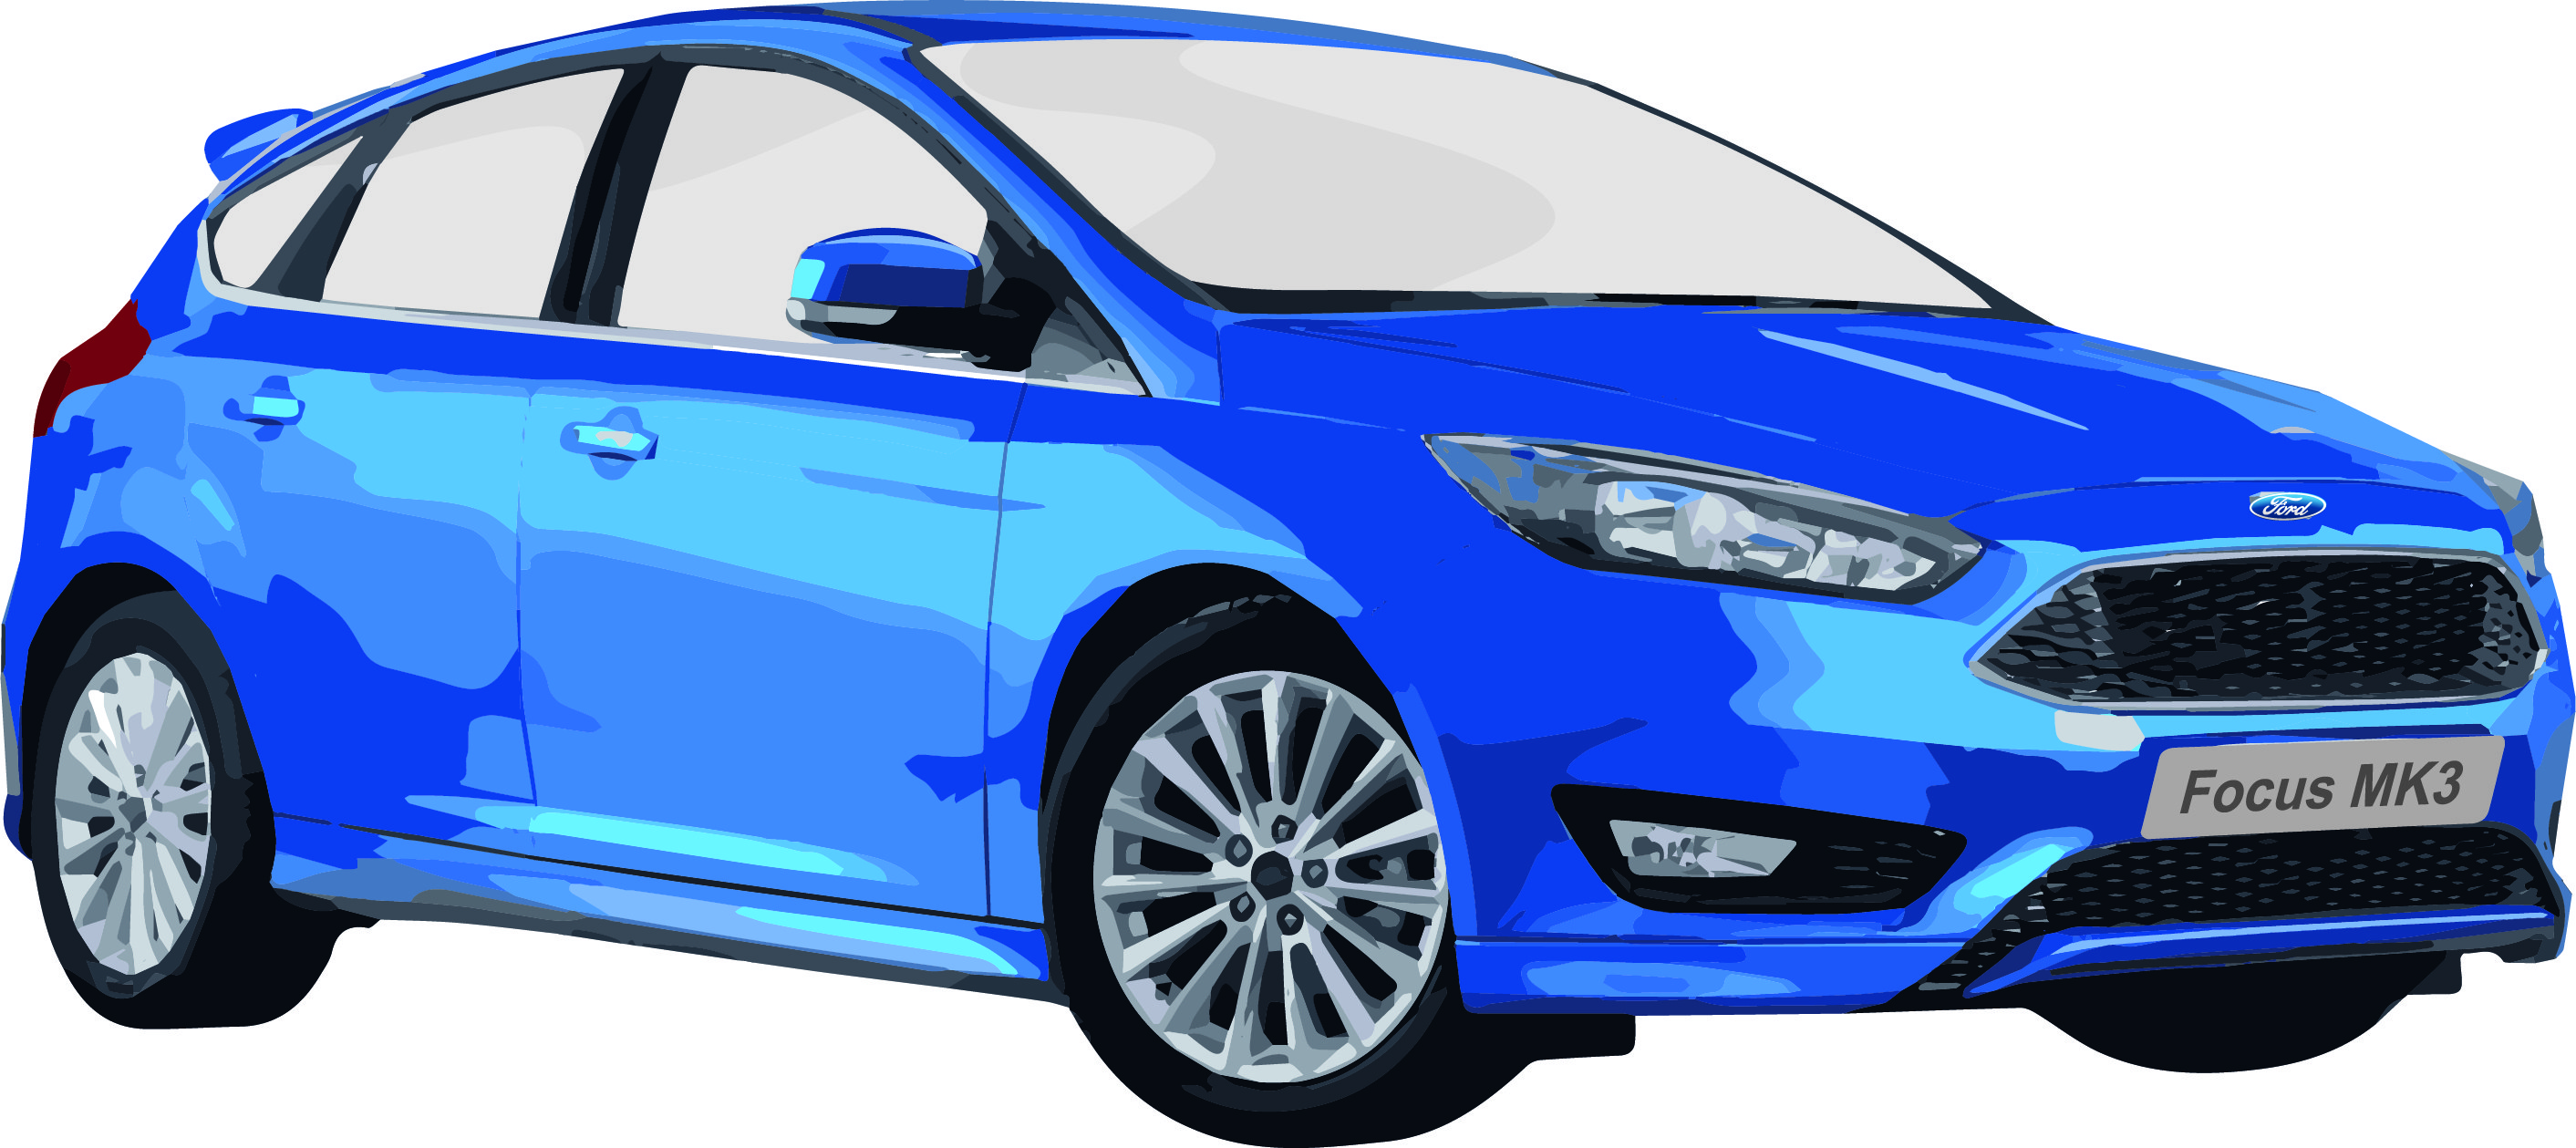 Ford Focus MK3 spare parts and product data from Motomobil